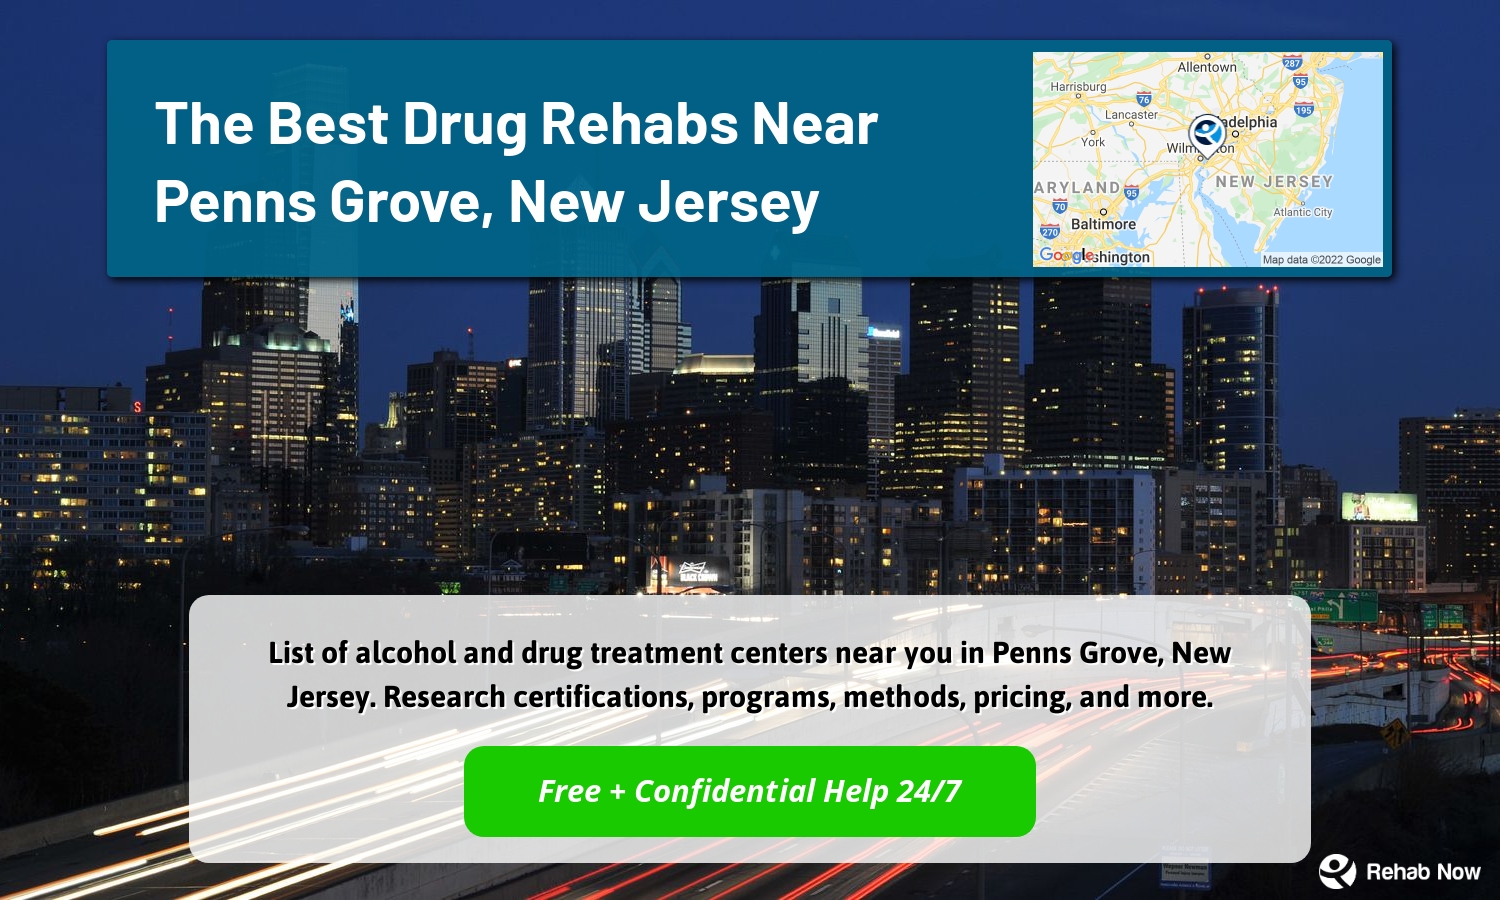 List of alcohol and drug treatment centers near you in Penns Grove, New Jersey. Research certifications, programs, methods, pricing, and more.